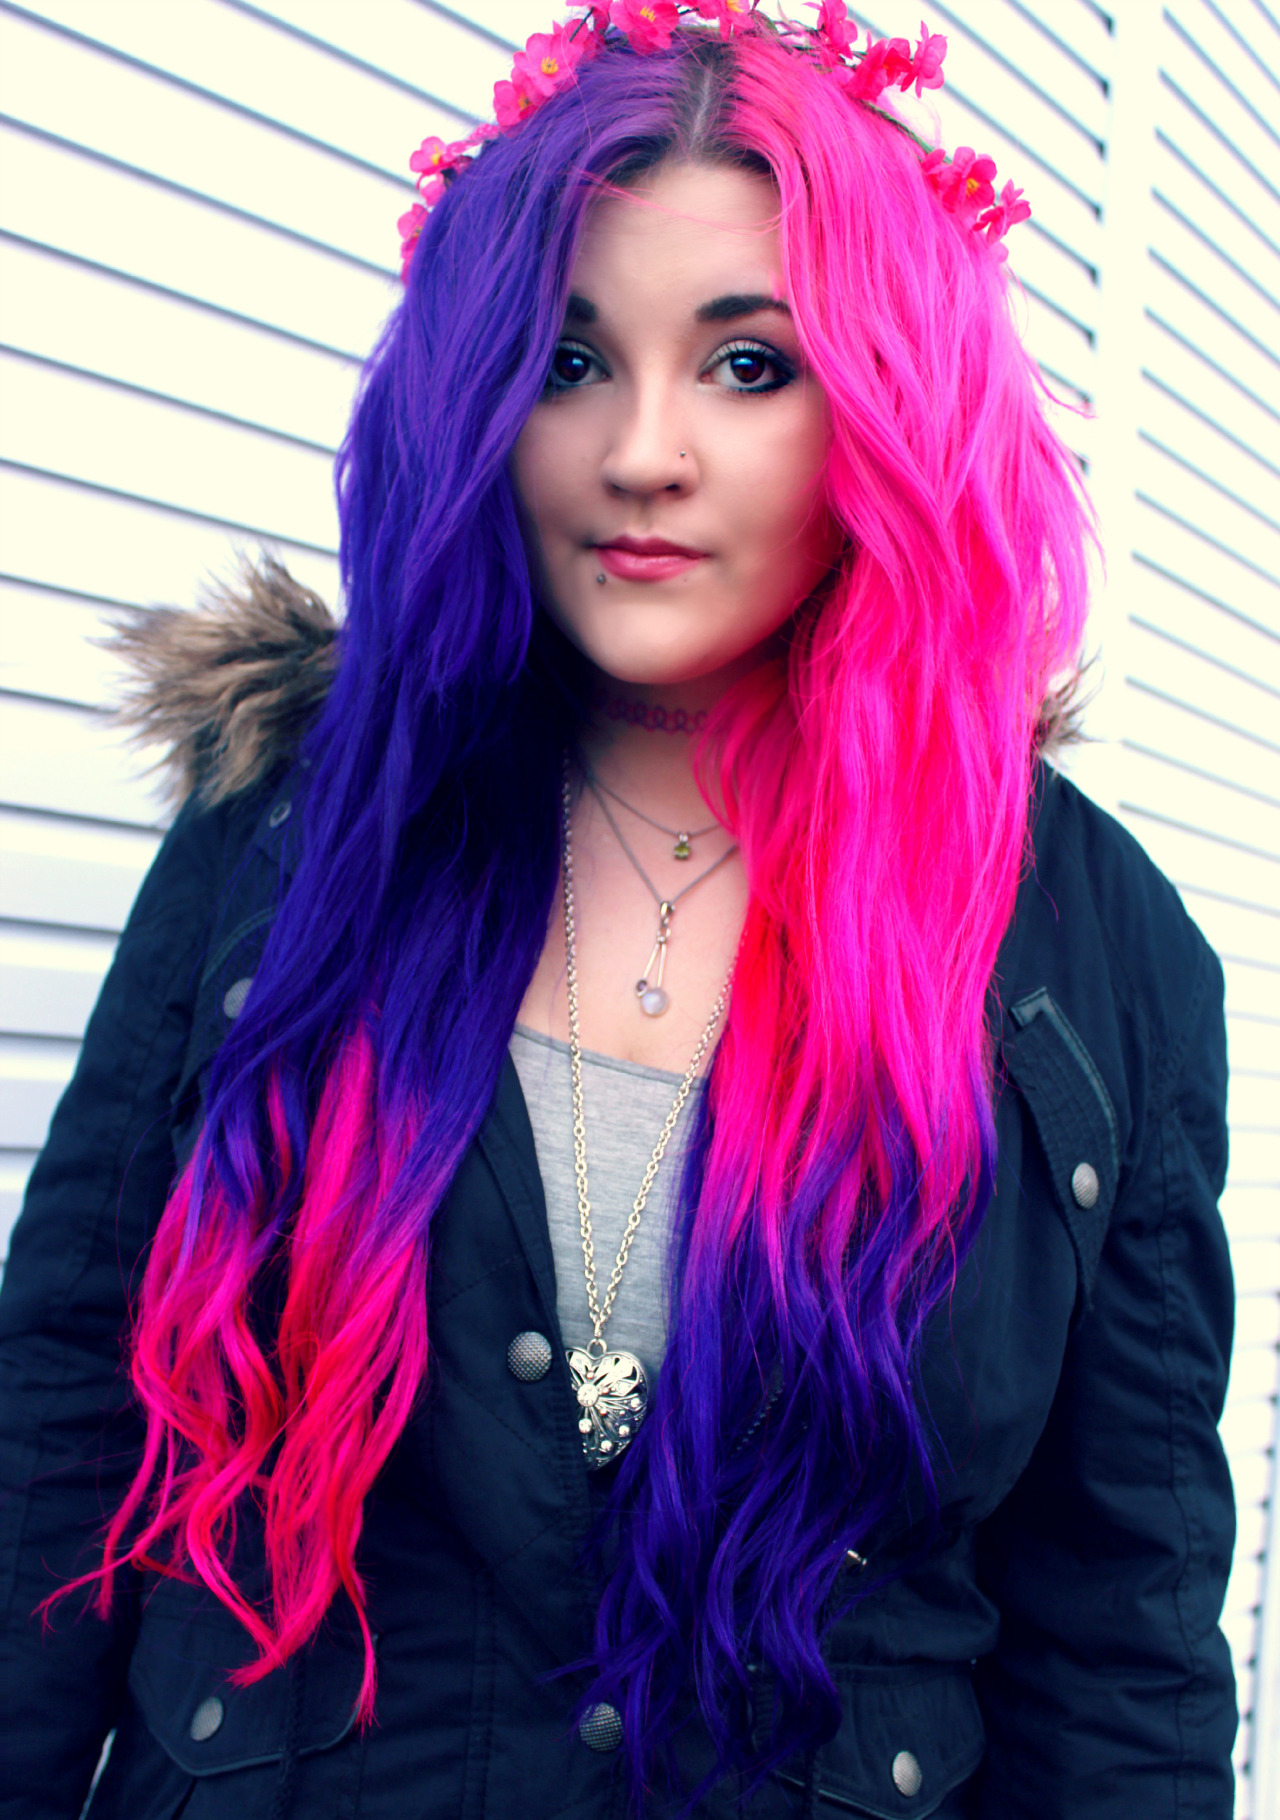 Not Your Typical Hair Blog Hazikinz Dyed My Hair Half And Half Ombre